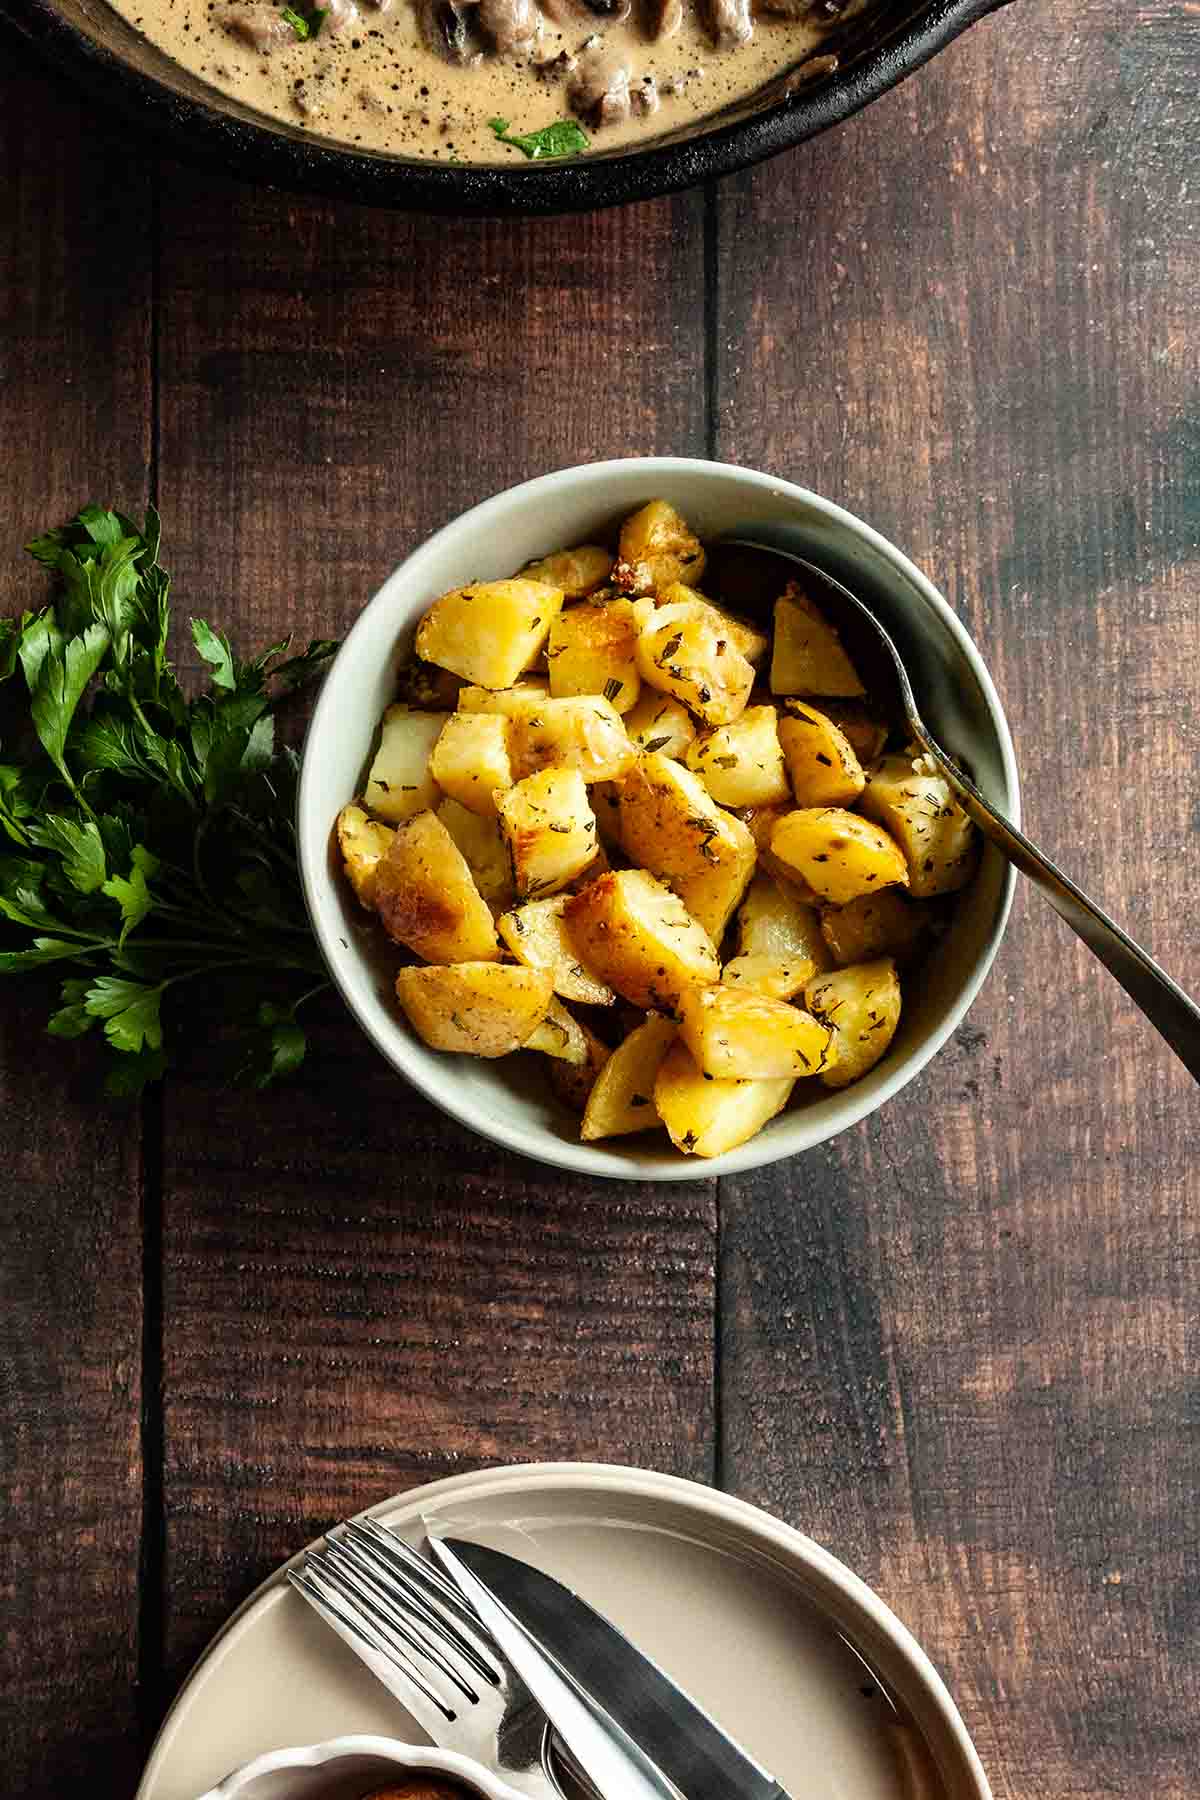 A bowl of roasted potatoes on a table with plates and utensils, fresh parsley, and a skillet meal.